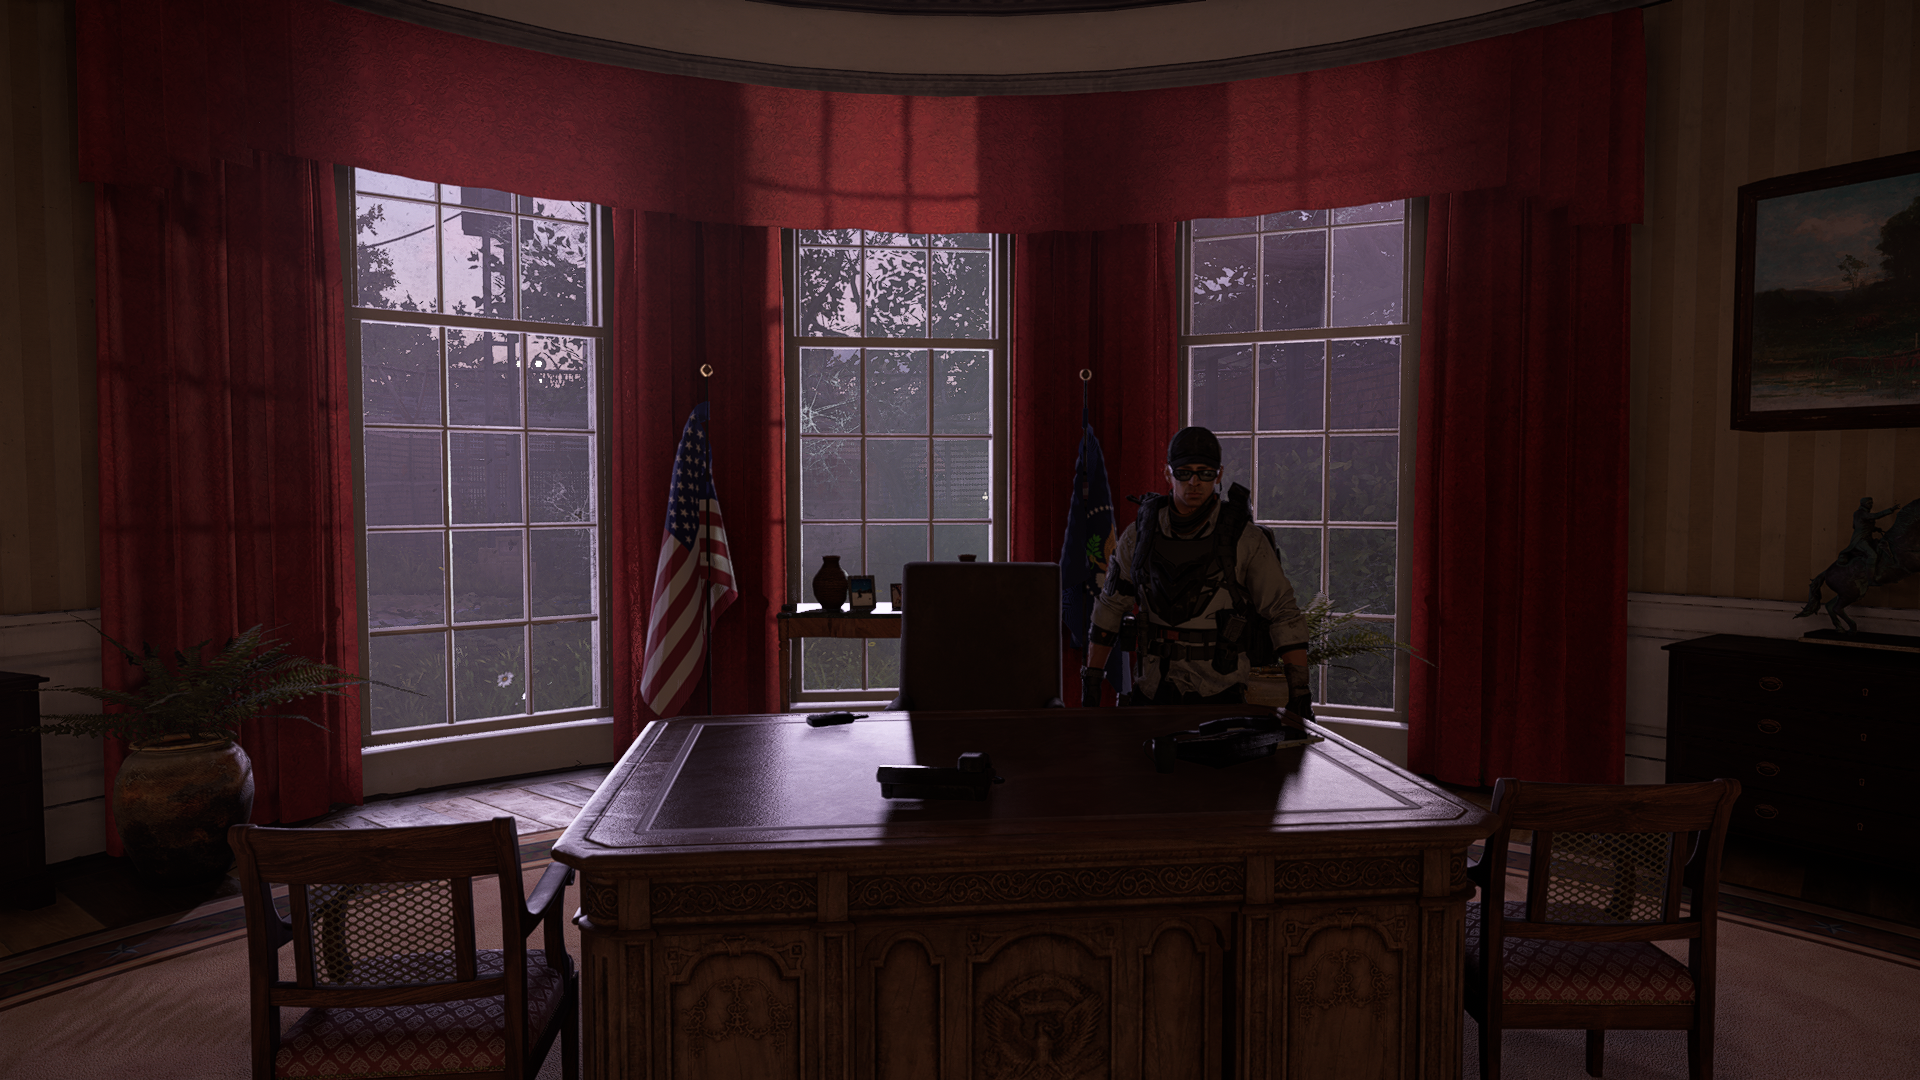 Divison 2 - Presidents oval office